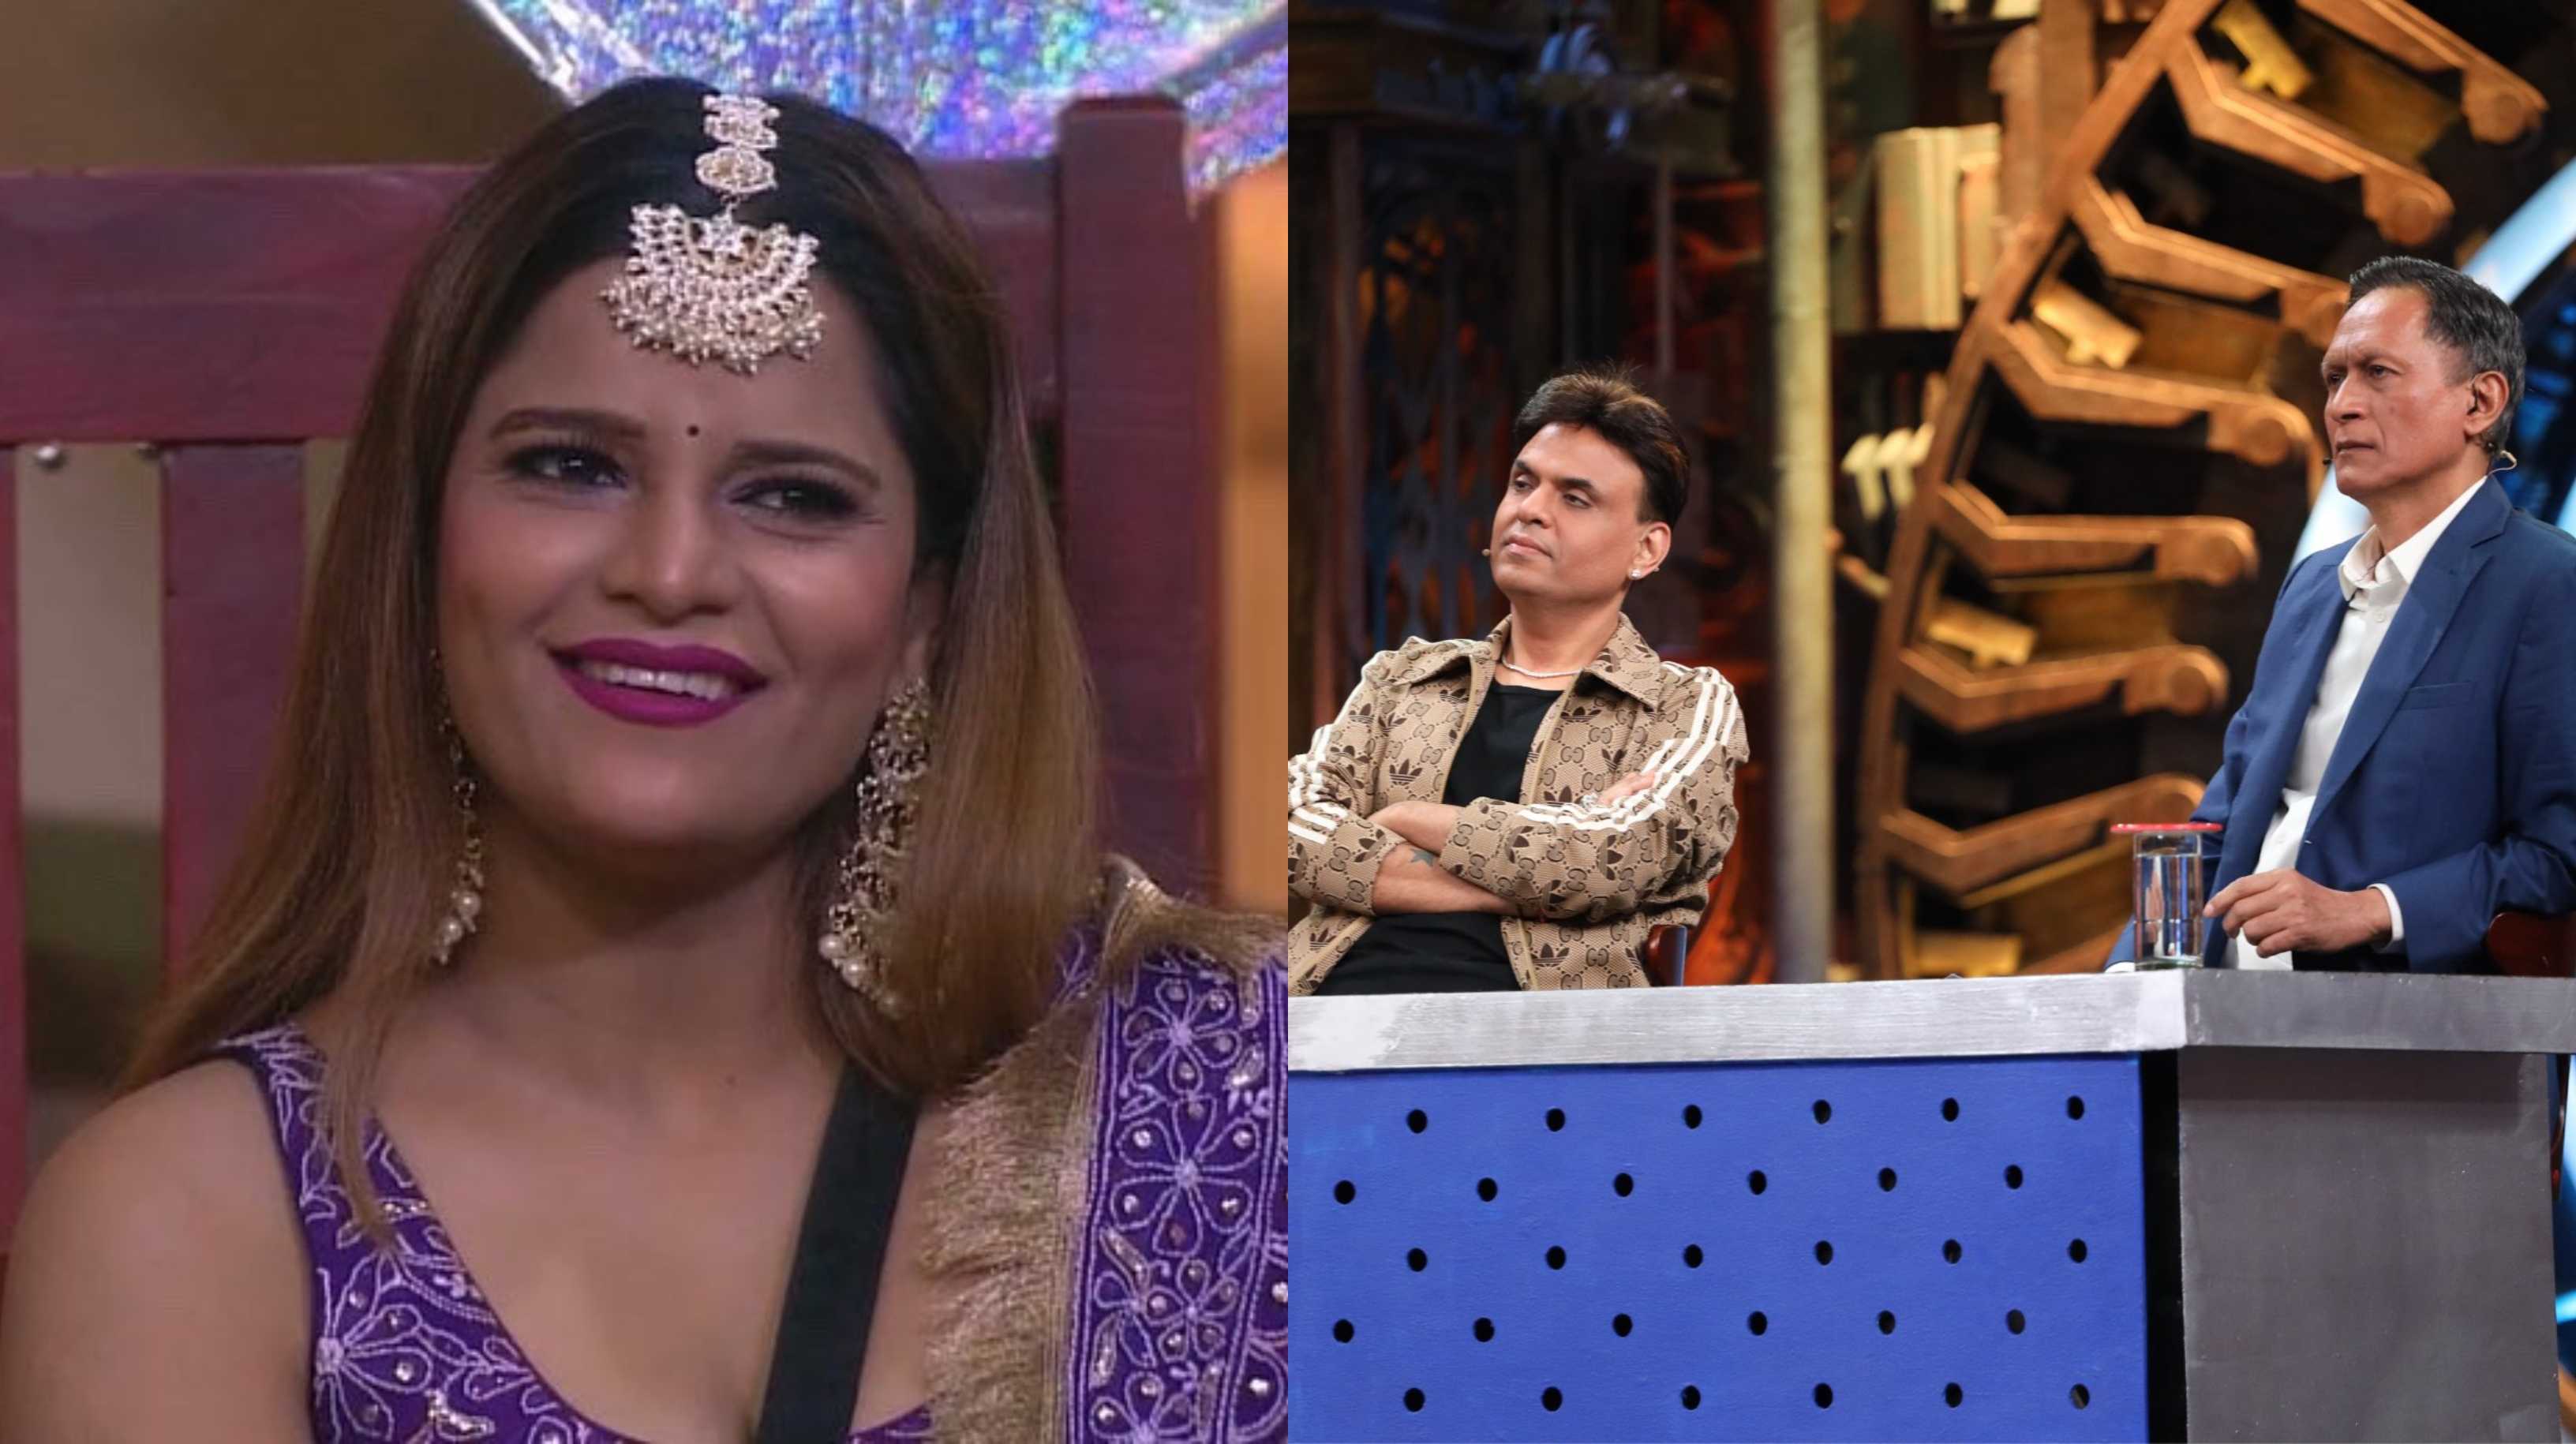 Bigg Boss 16: Fans accuse makers & guests of trying to dull Archana’s sparkle, trend ‘Stop Targeting Archana’